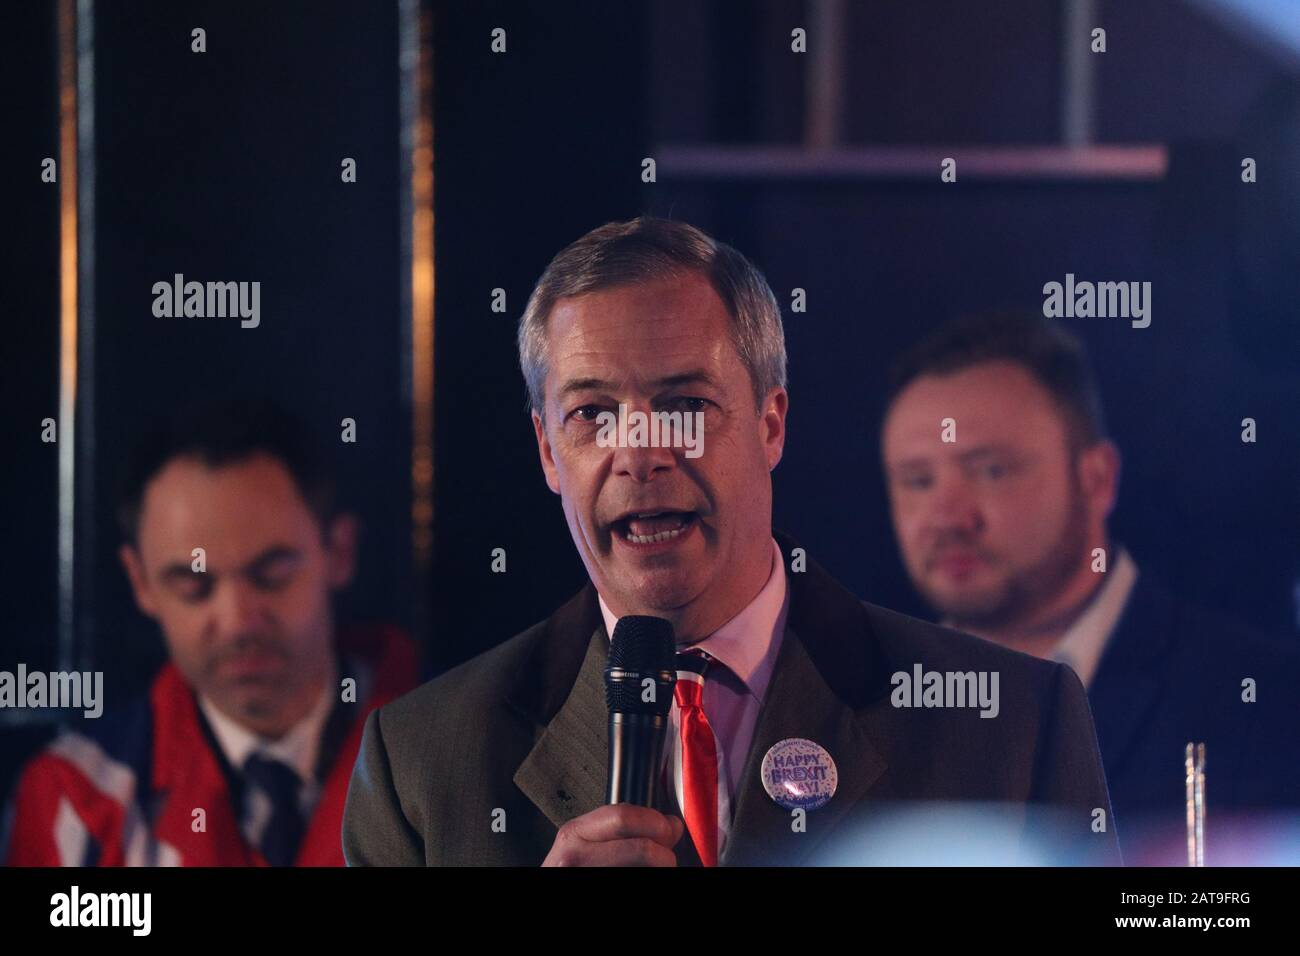 Nigel Farage speaks to pro-Brexit supporters in Parliament Square, London, as the UK prepares to leave the European Union, ending 47 years of close and sometimes uncomfortable ties to Brussels. Stock Photo